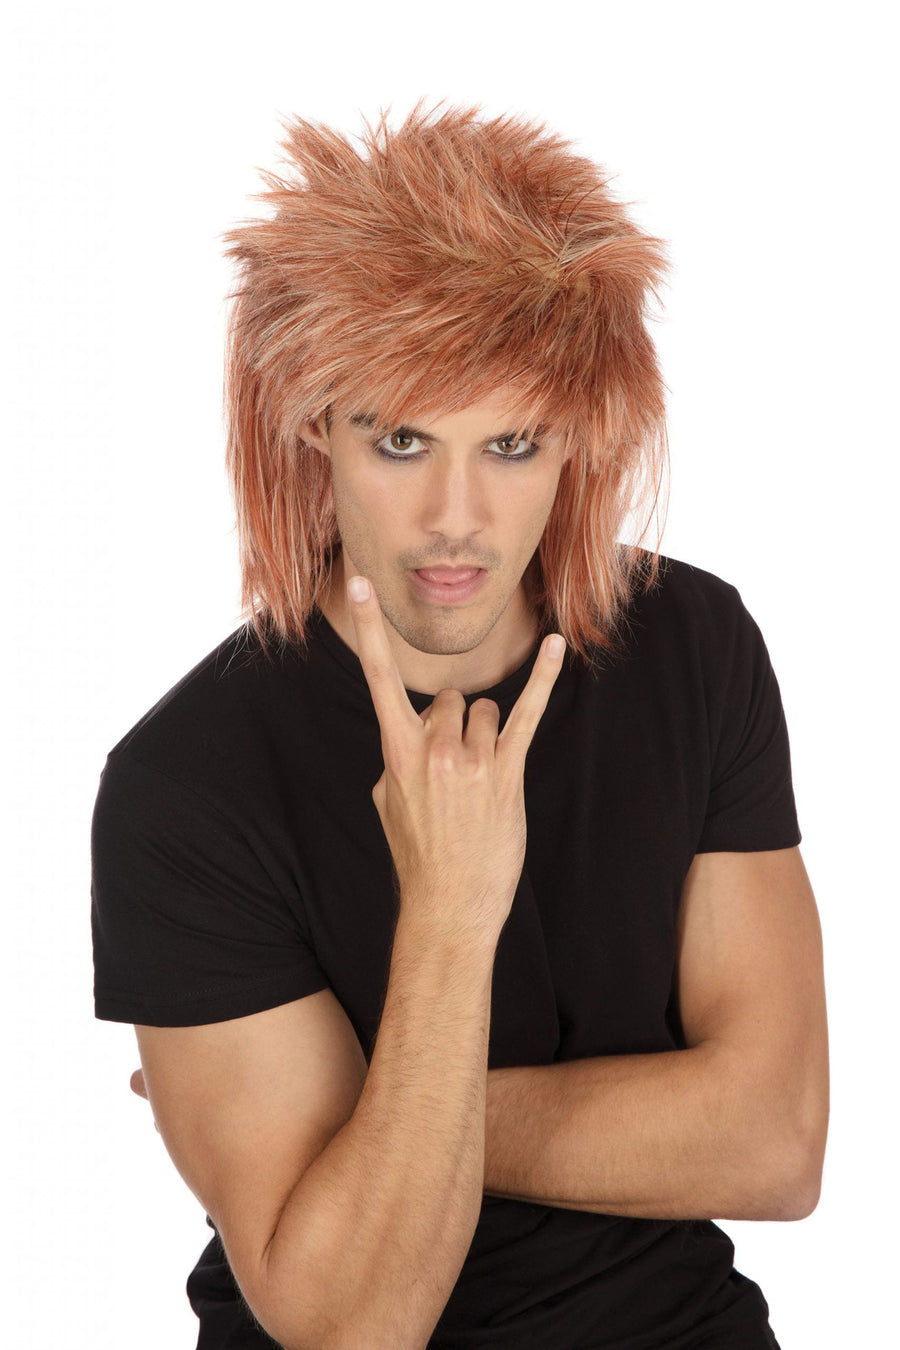 Mens Shaggy Wig Ginger Wigs Male Halloween Costume_1